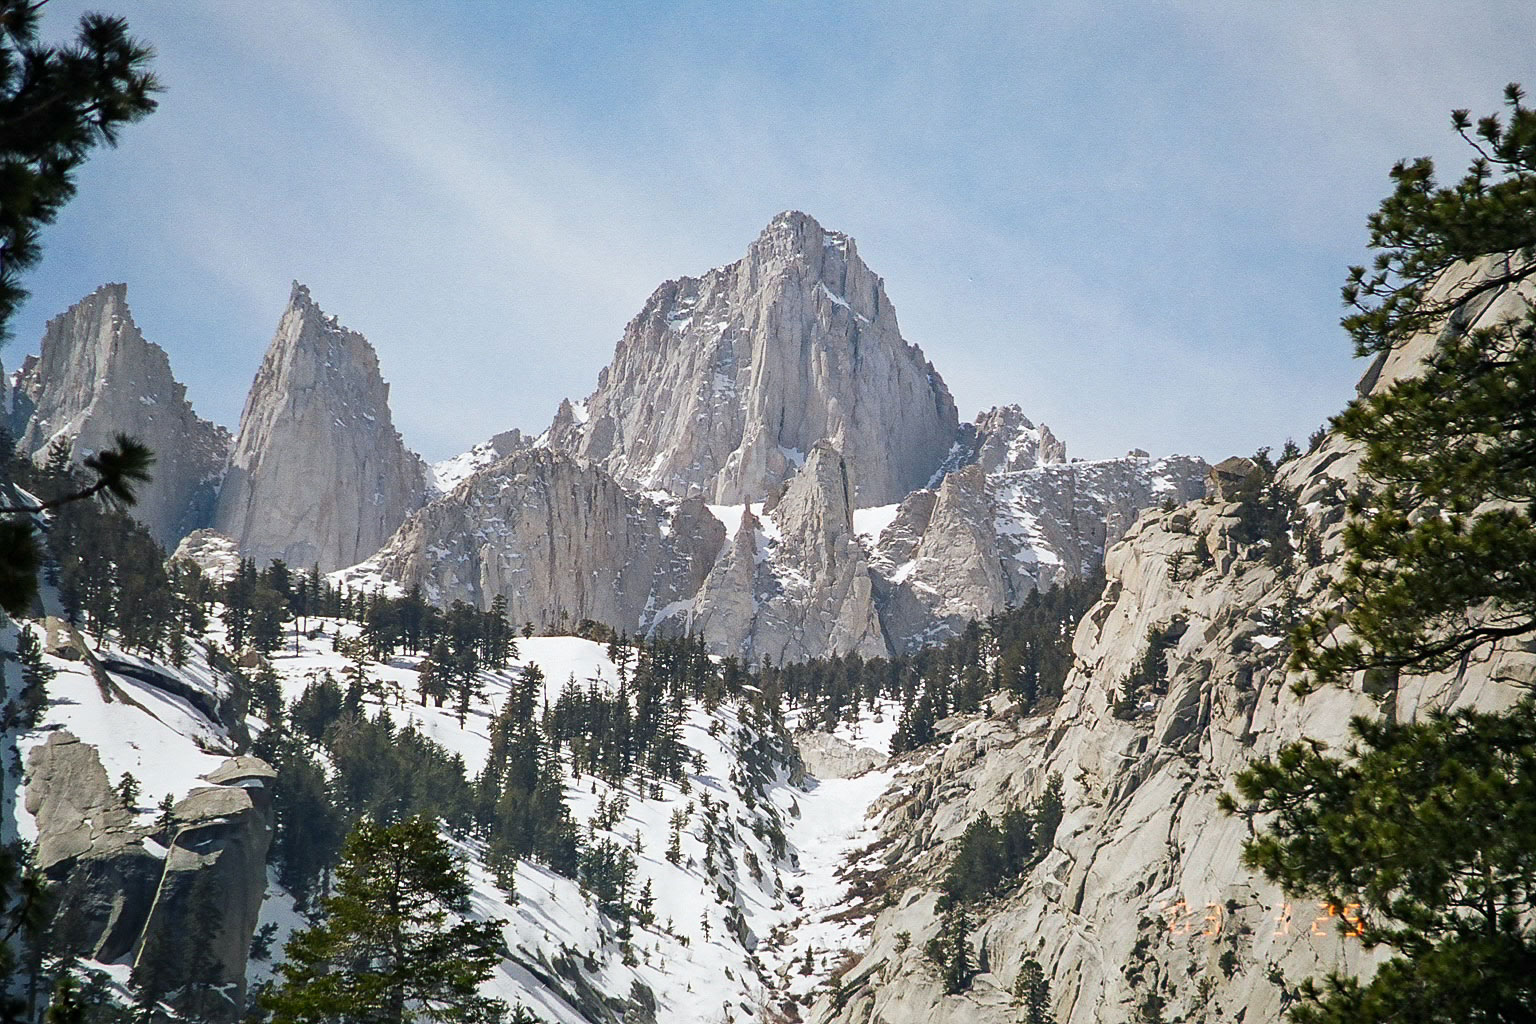 Photograph of the peak of Mount Whitney, the highest peak in California. The photo shows a triangular stone peak. In the foreground, a snowy slope is covered with conifers.